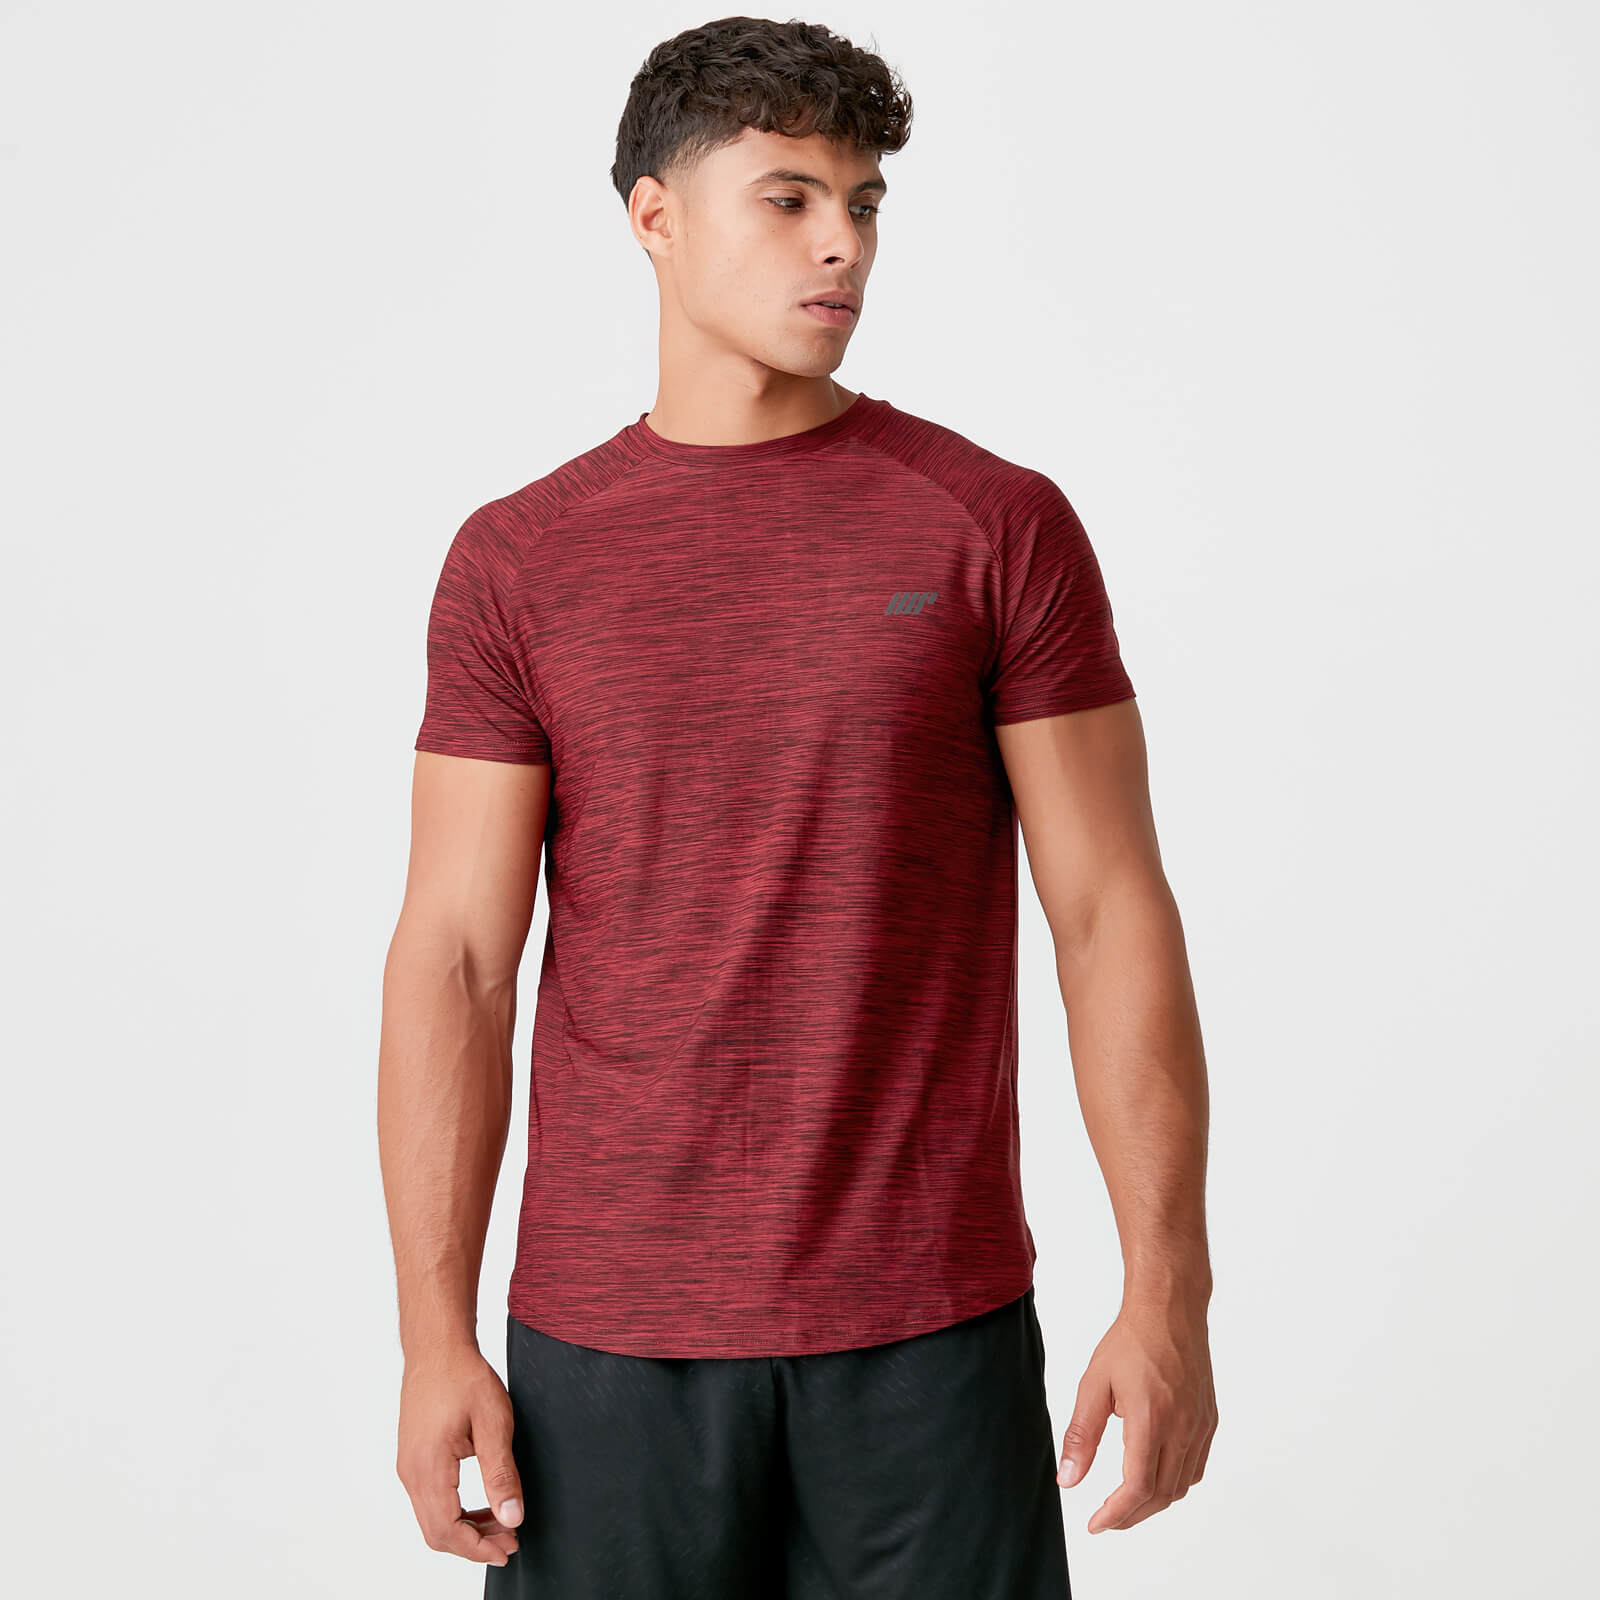 Myprotein Dry-Tech Infinity T-Shirt - Red Marl - S